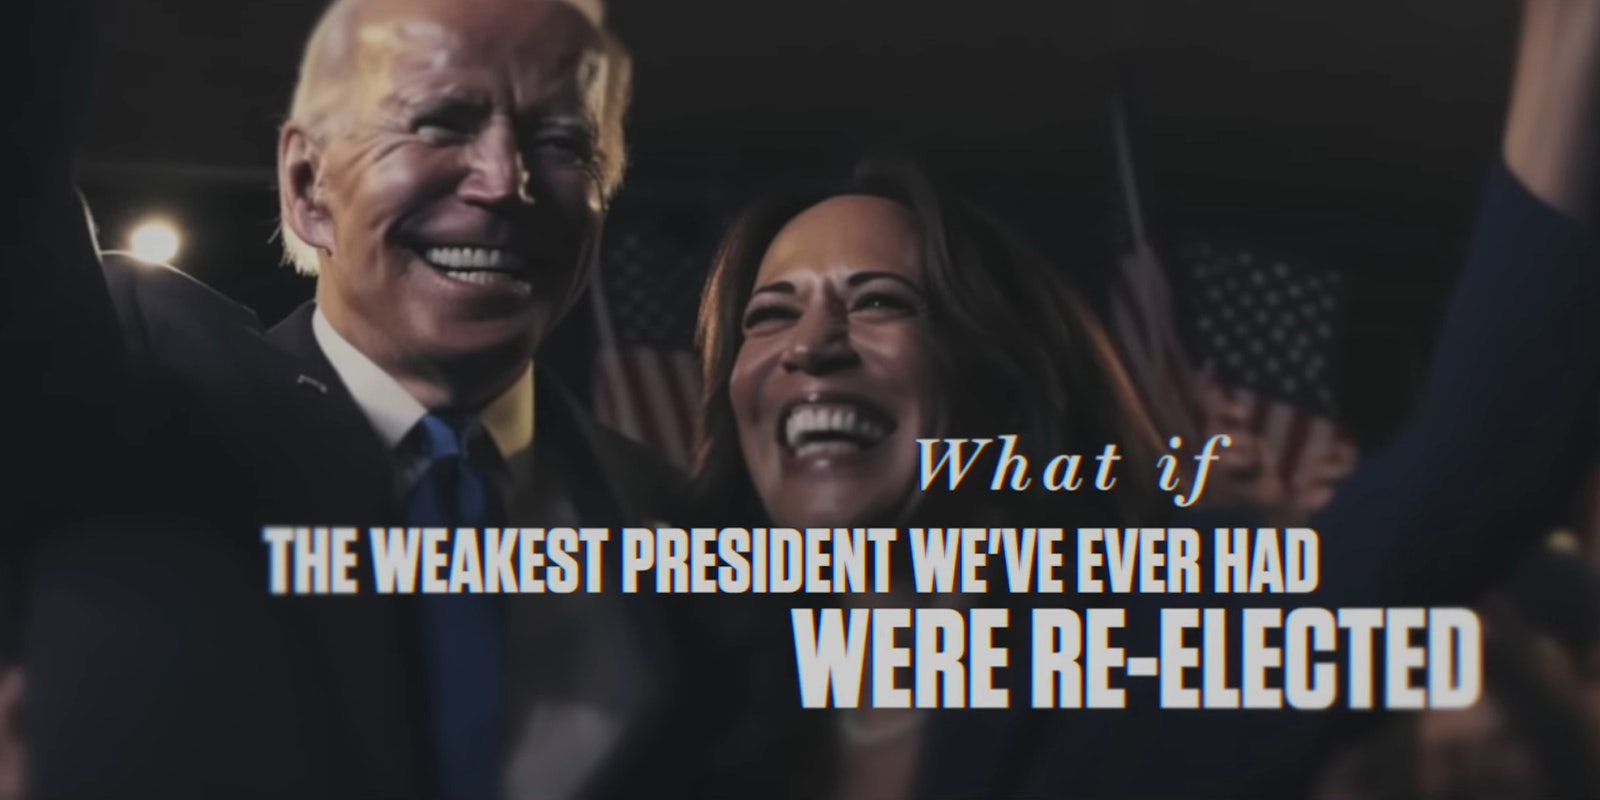 AI generated image of Joe Biden and Kamala Harris with caption 'What if THE WEAKEST PRESIDENT WE'VE EVER HAD WERE RE-ELECTED'